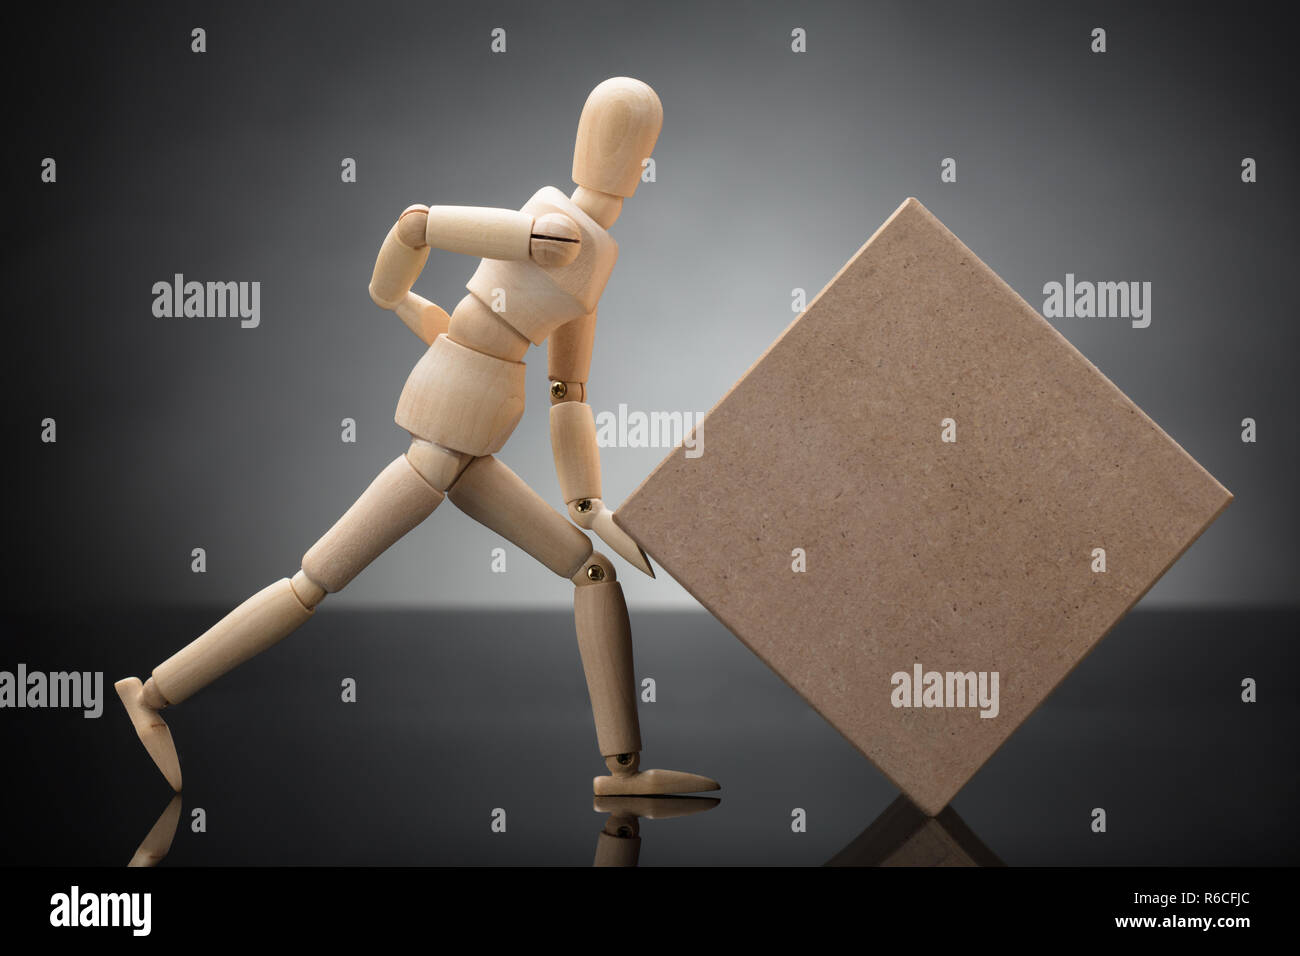 Wooden Dummy Lifting Cardboard Box Suffering From Back Pain Stock Photo